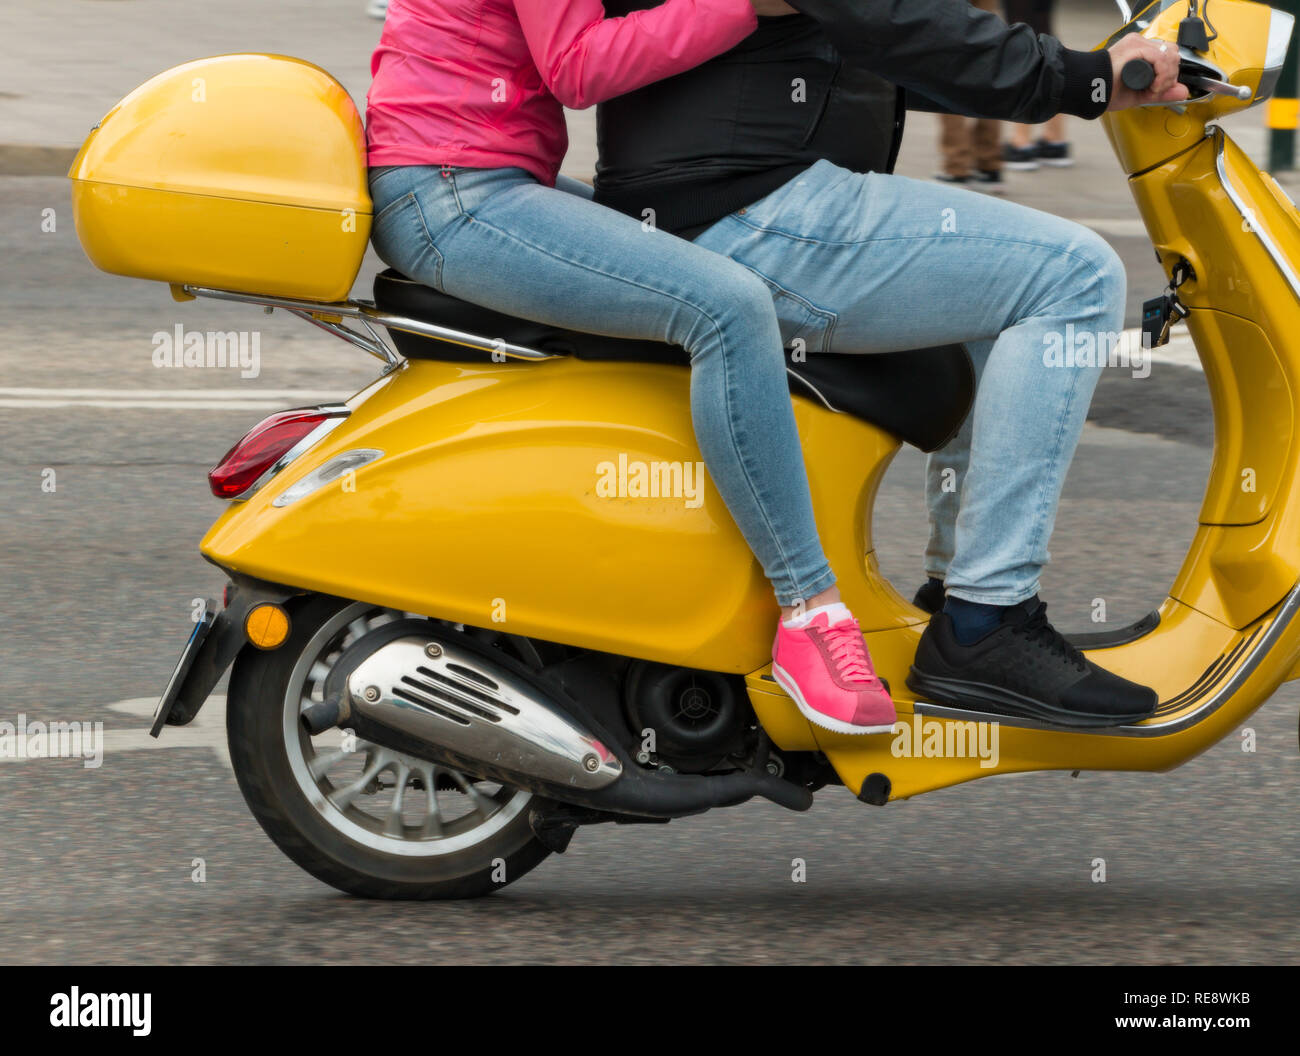 Woman Riding A Scooter High Resolution Stock Photography and Images - Alamy